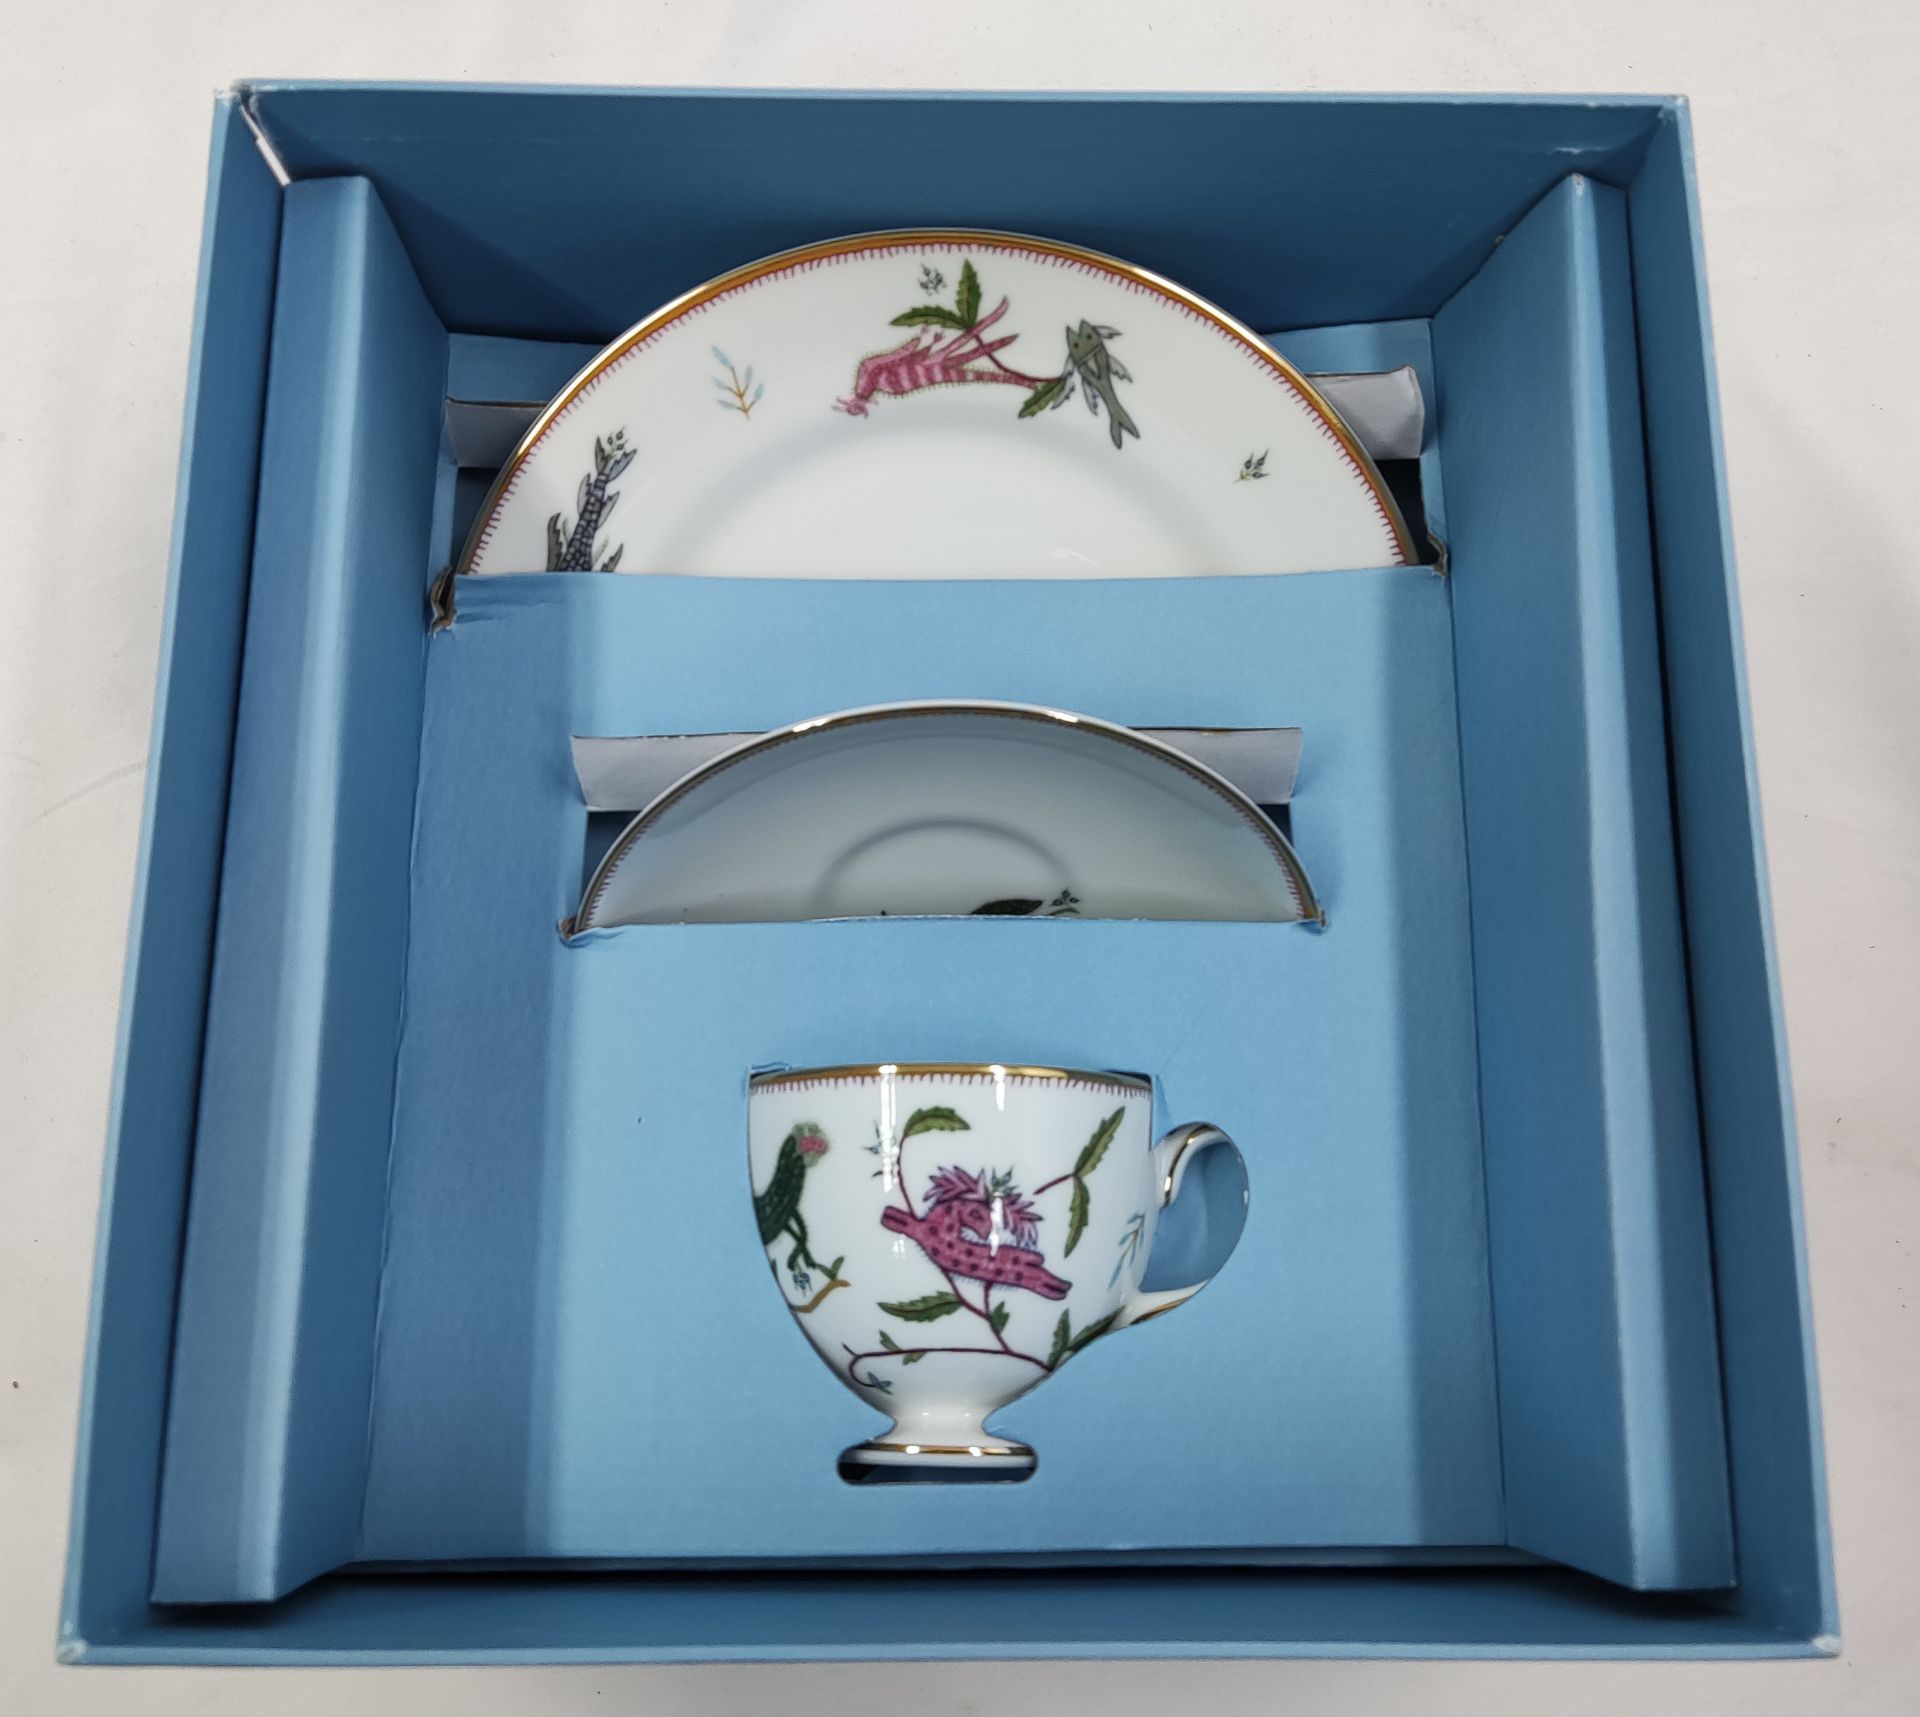 1 x WEDGWOOD Mythical Creatures Fine Bone China Teacup/Saucer/Plate Set - New/Boxed - RRP £140.00 - Bild 15 aus 20